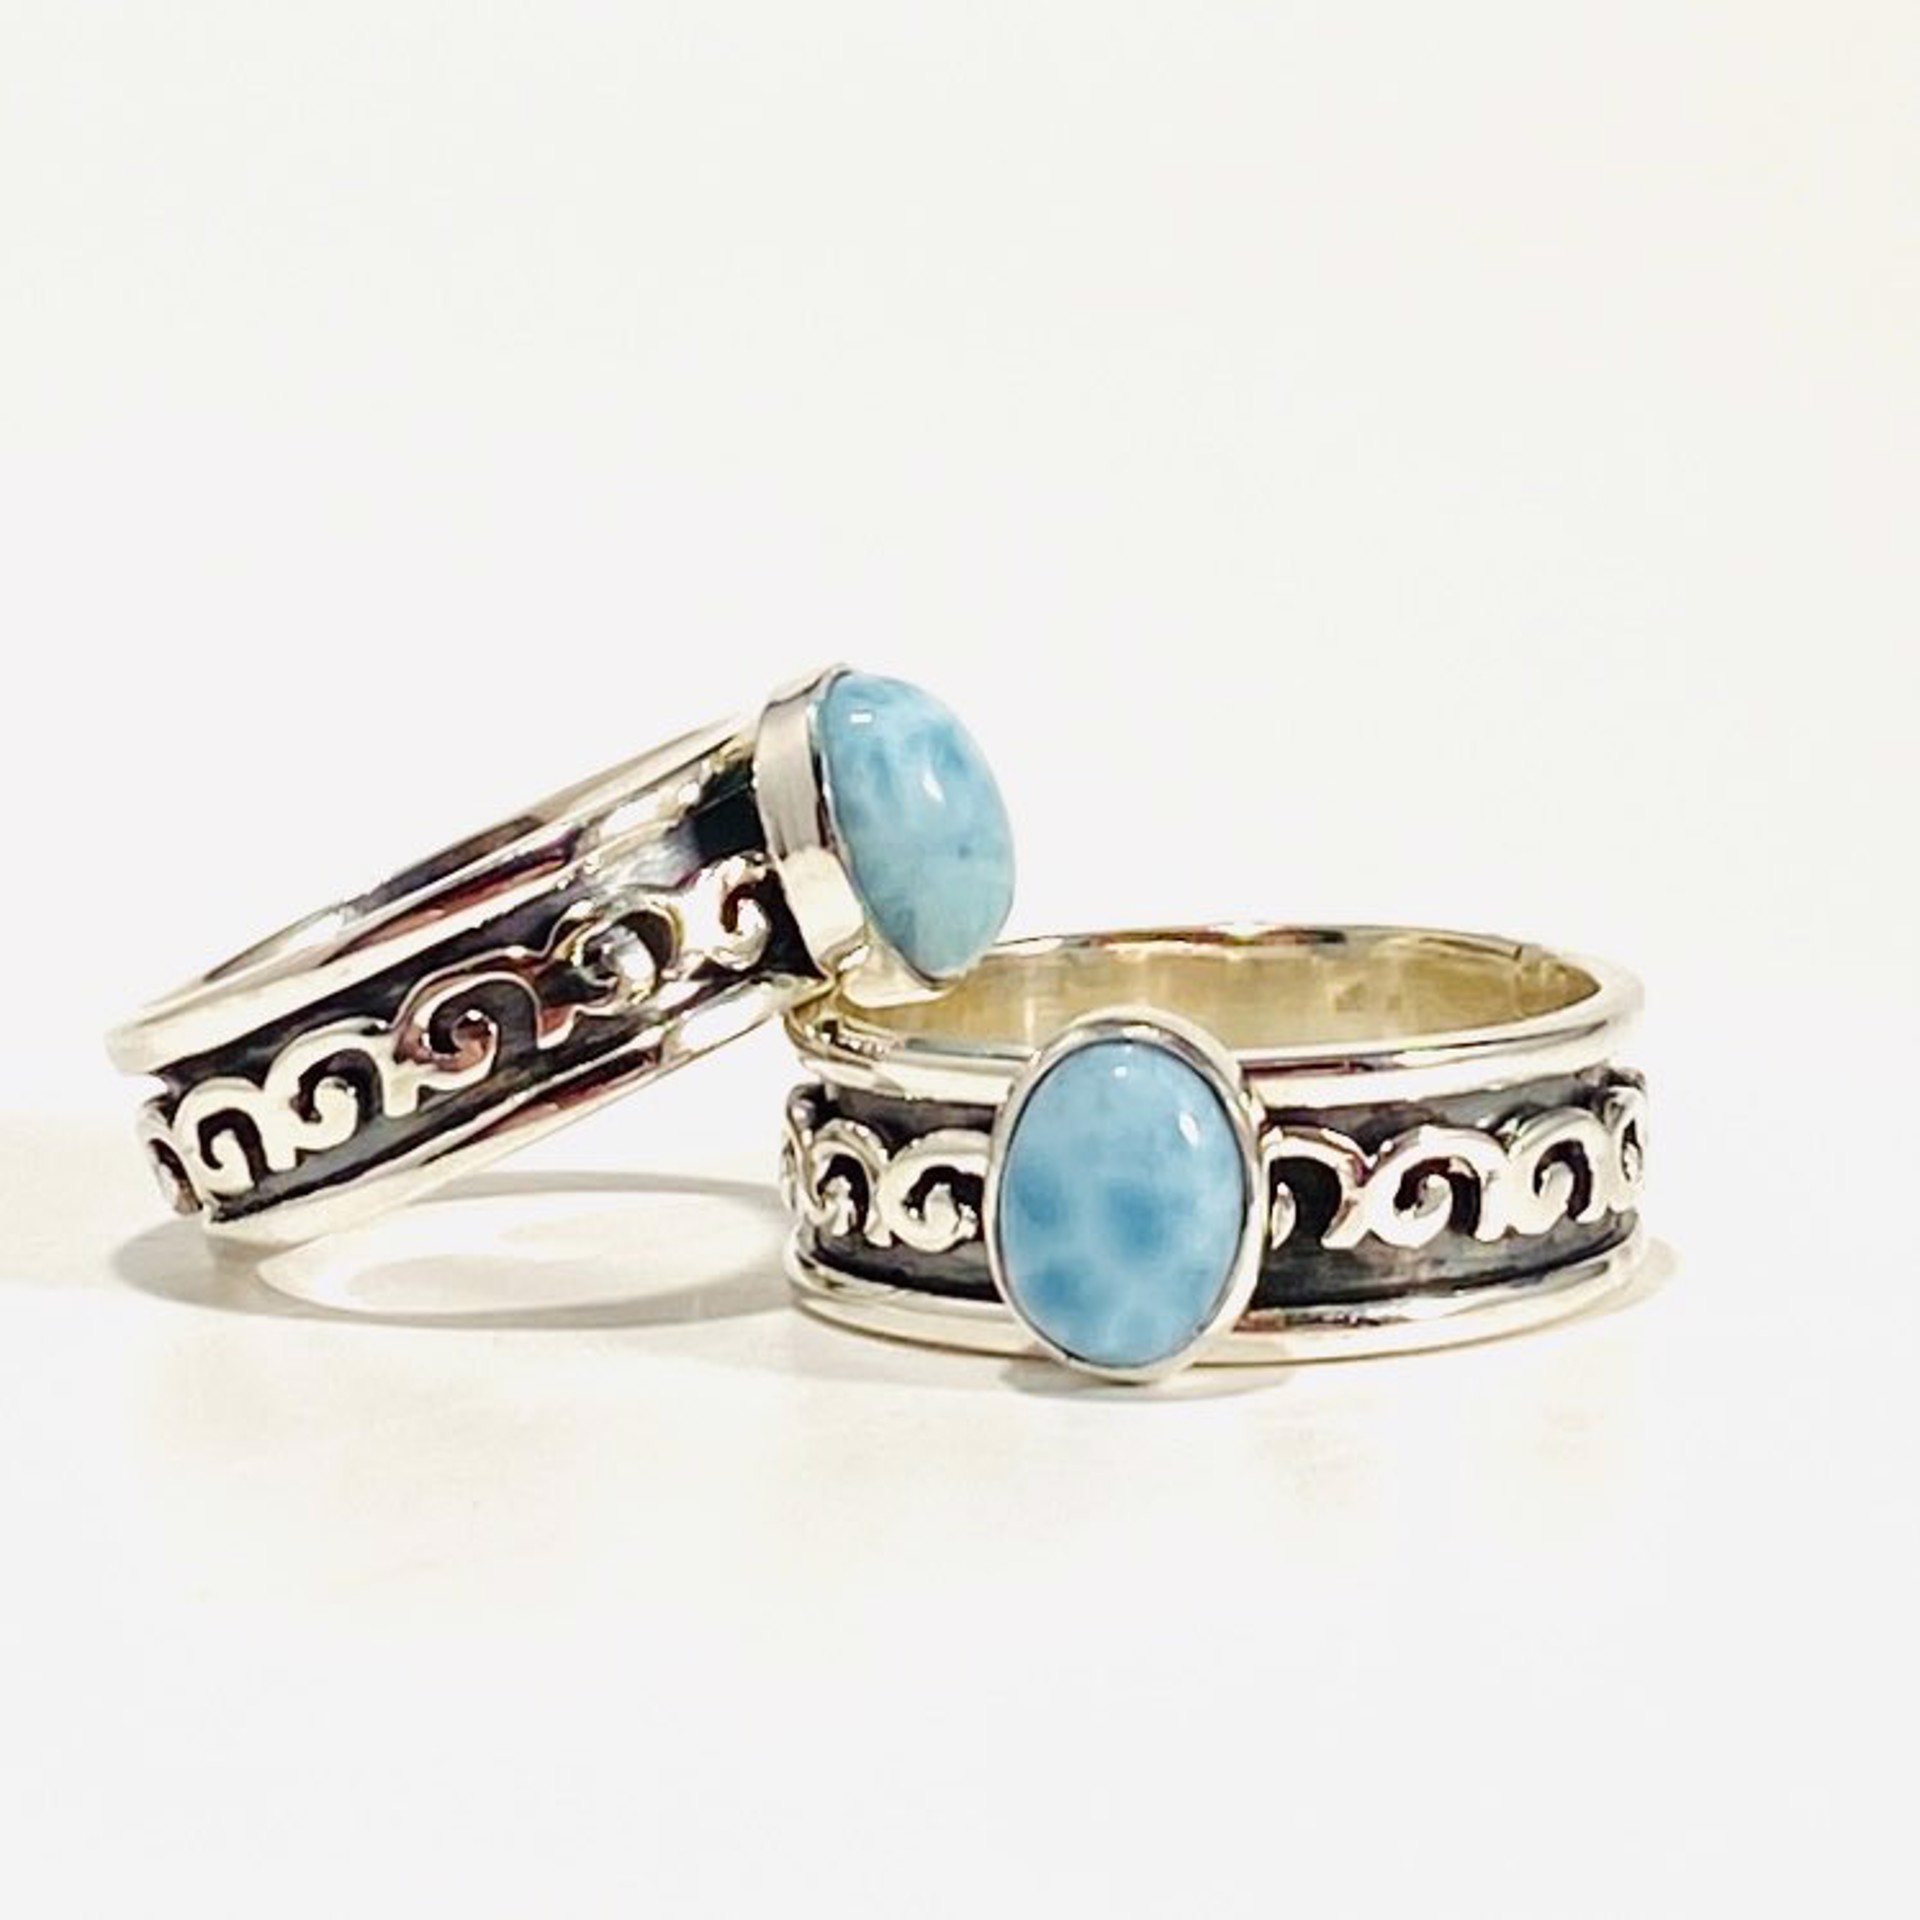 Larimar, Moonstone Spin Ring LIMITED SIZES MONSR-3296 by Monica Mehta